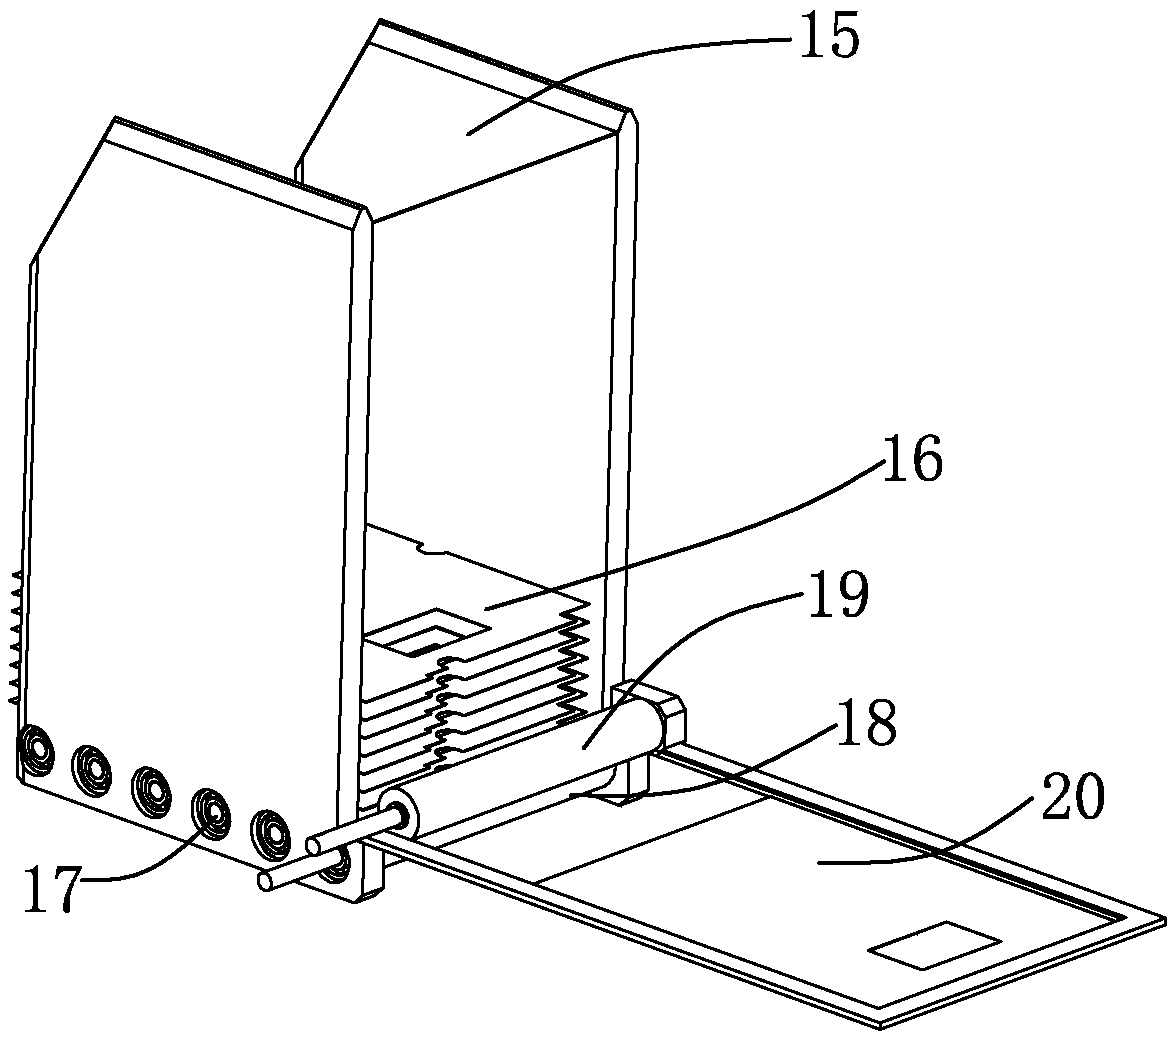 Device assisting in scanning financial accounting documents